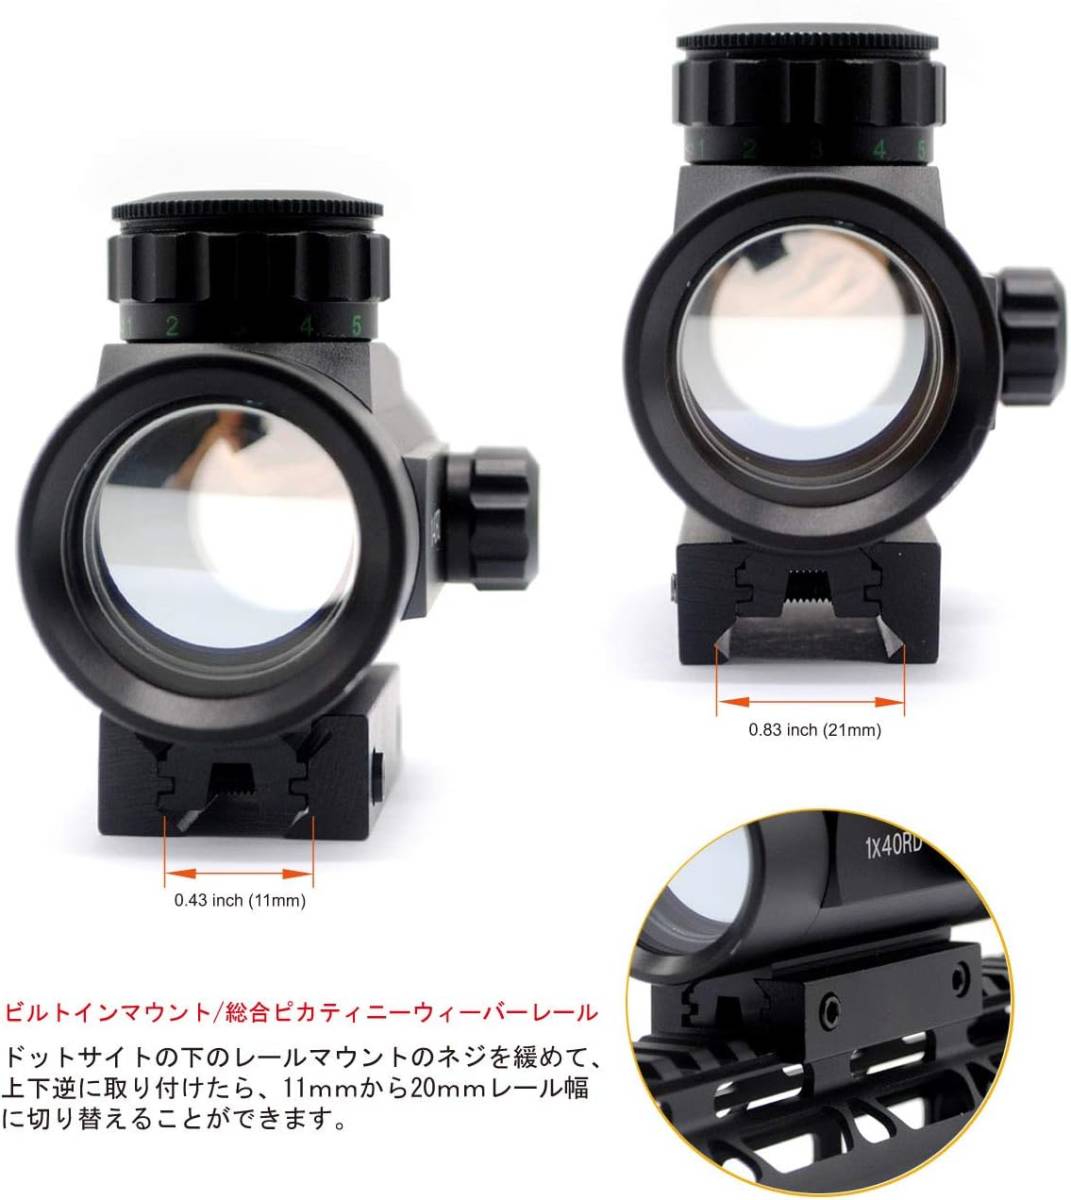  old version Trirock red / green dot site 1×40RD 20mm/10mm rail mount correspondence optics optical sight red / green each 